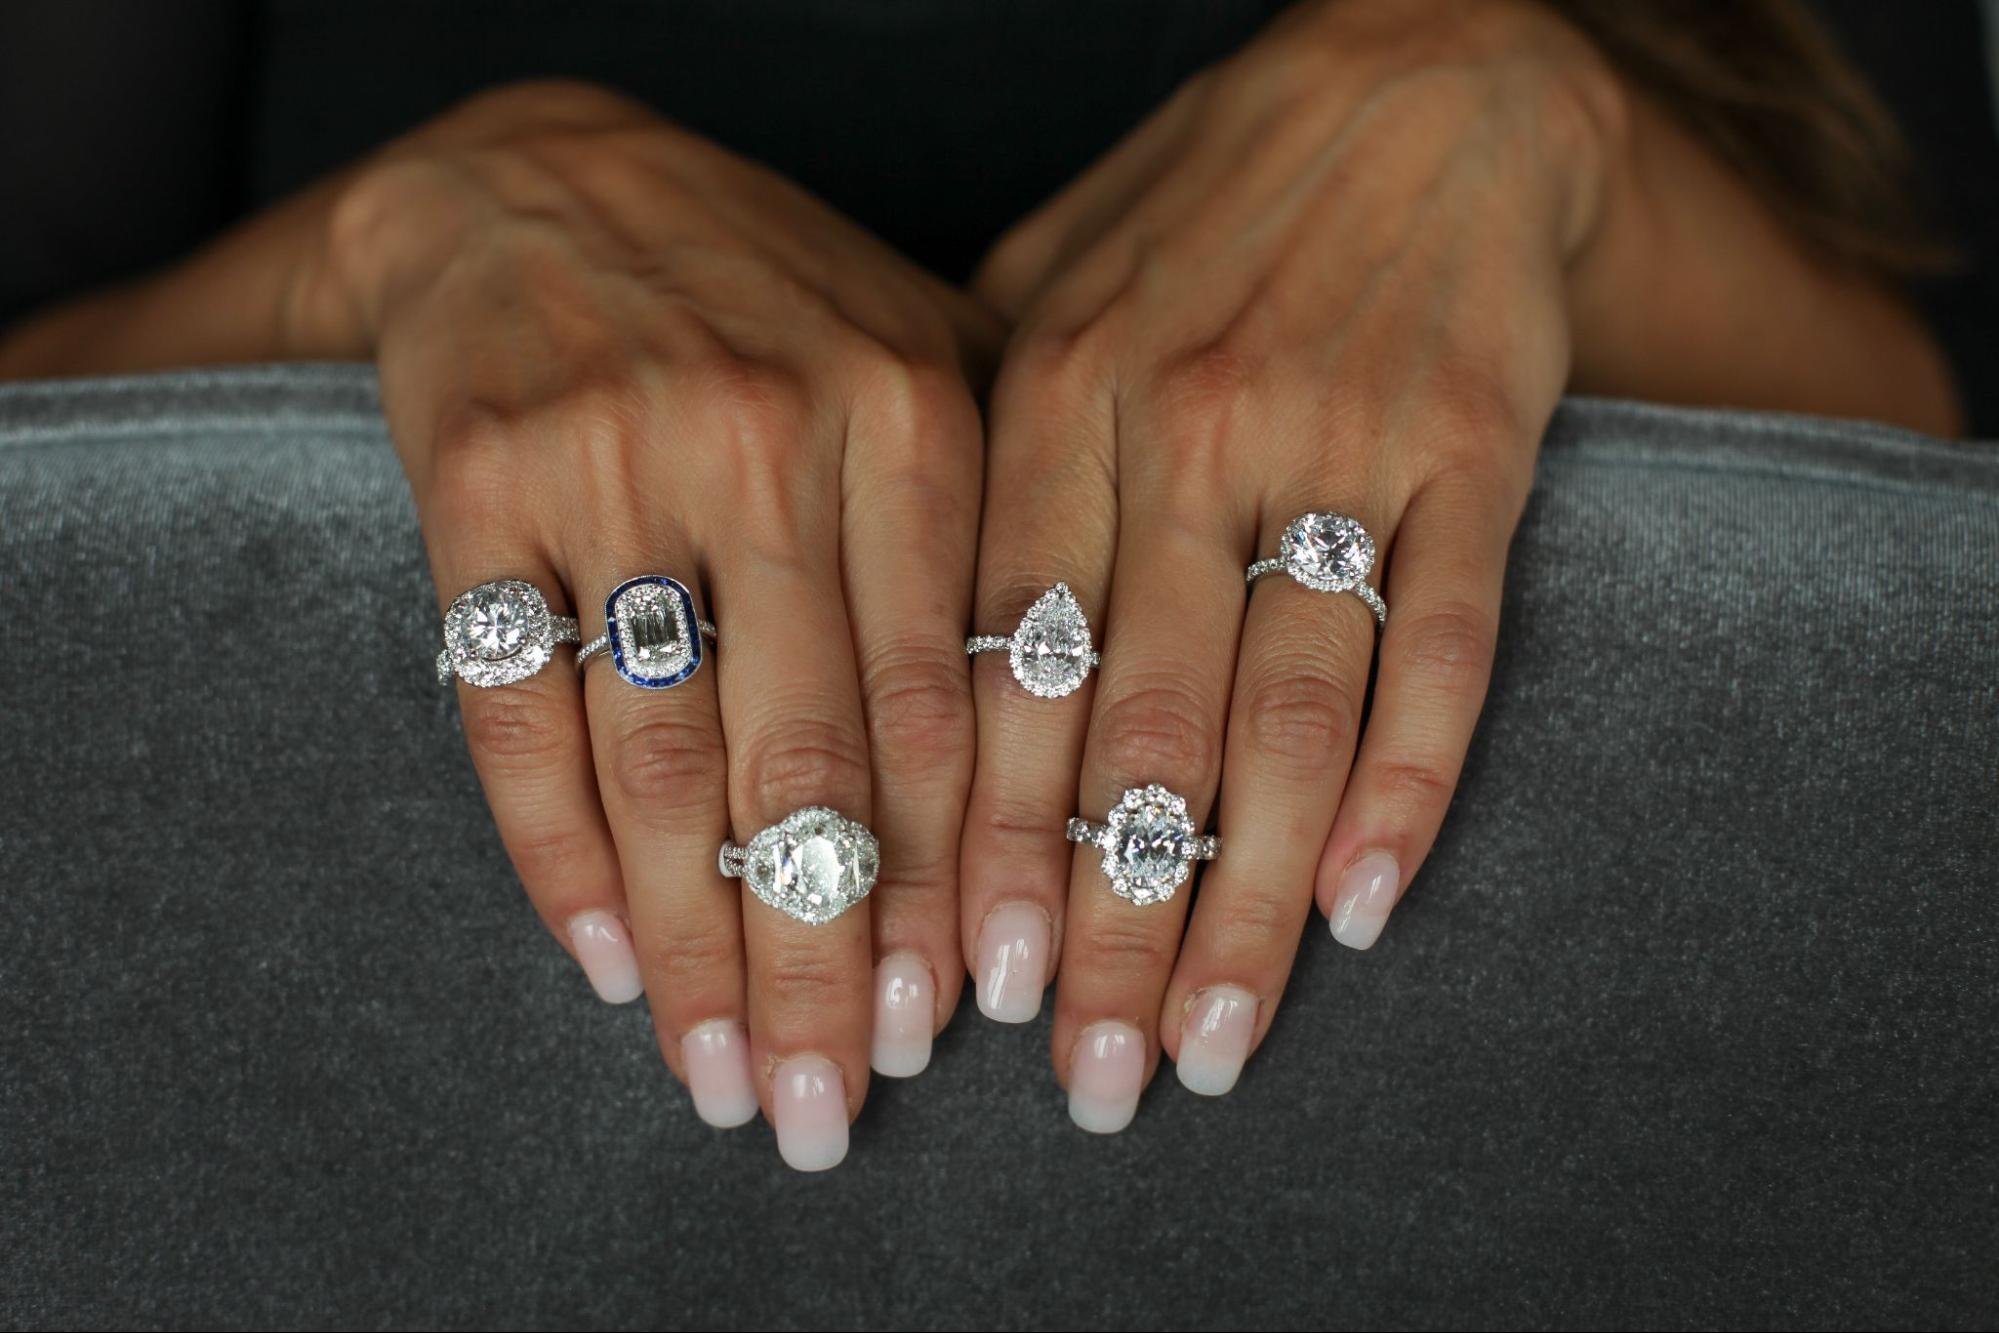 a woman’s hands with multiple diamond rings on almost every finger